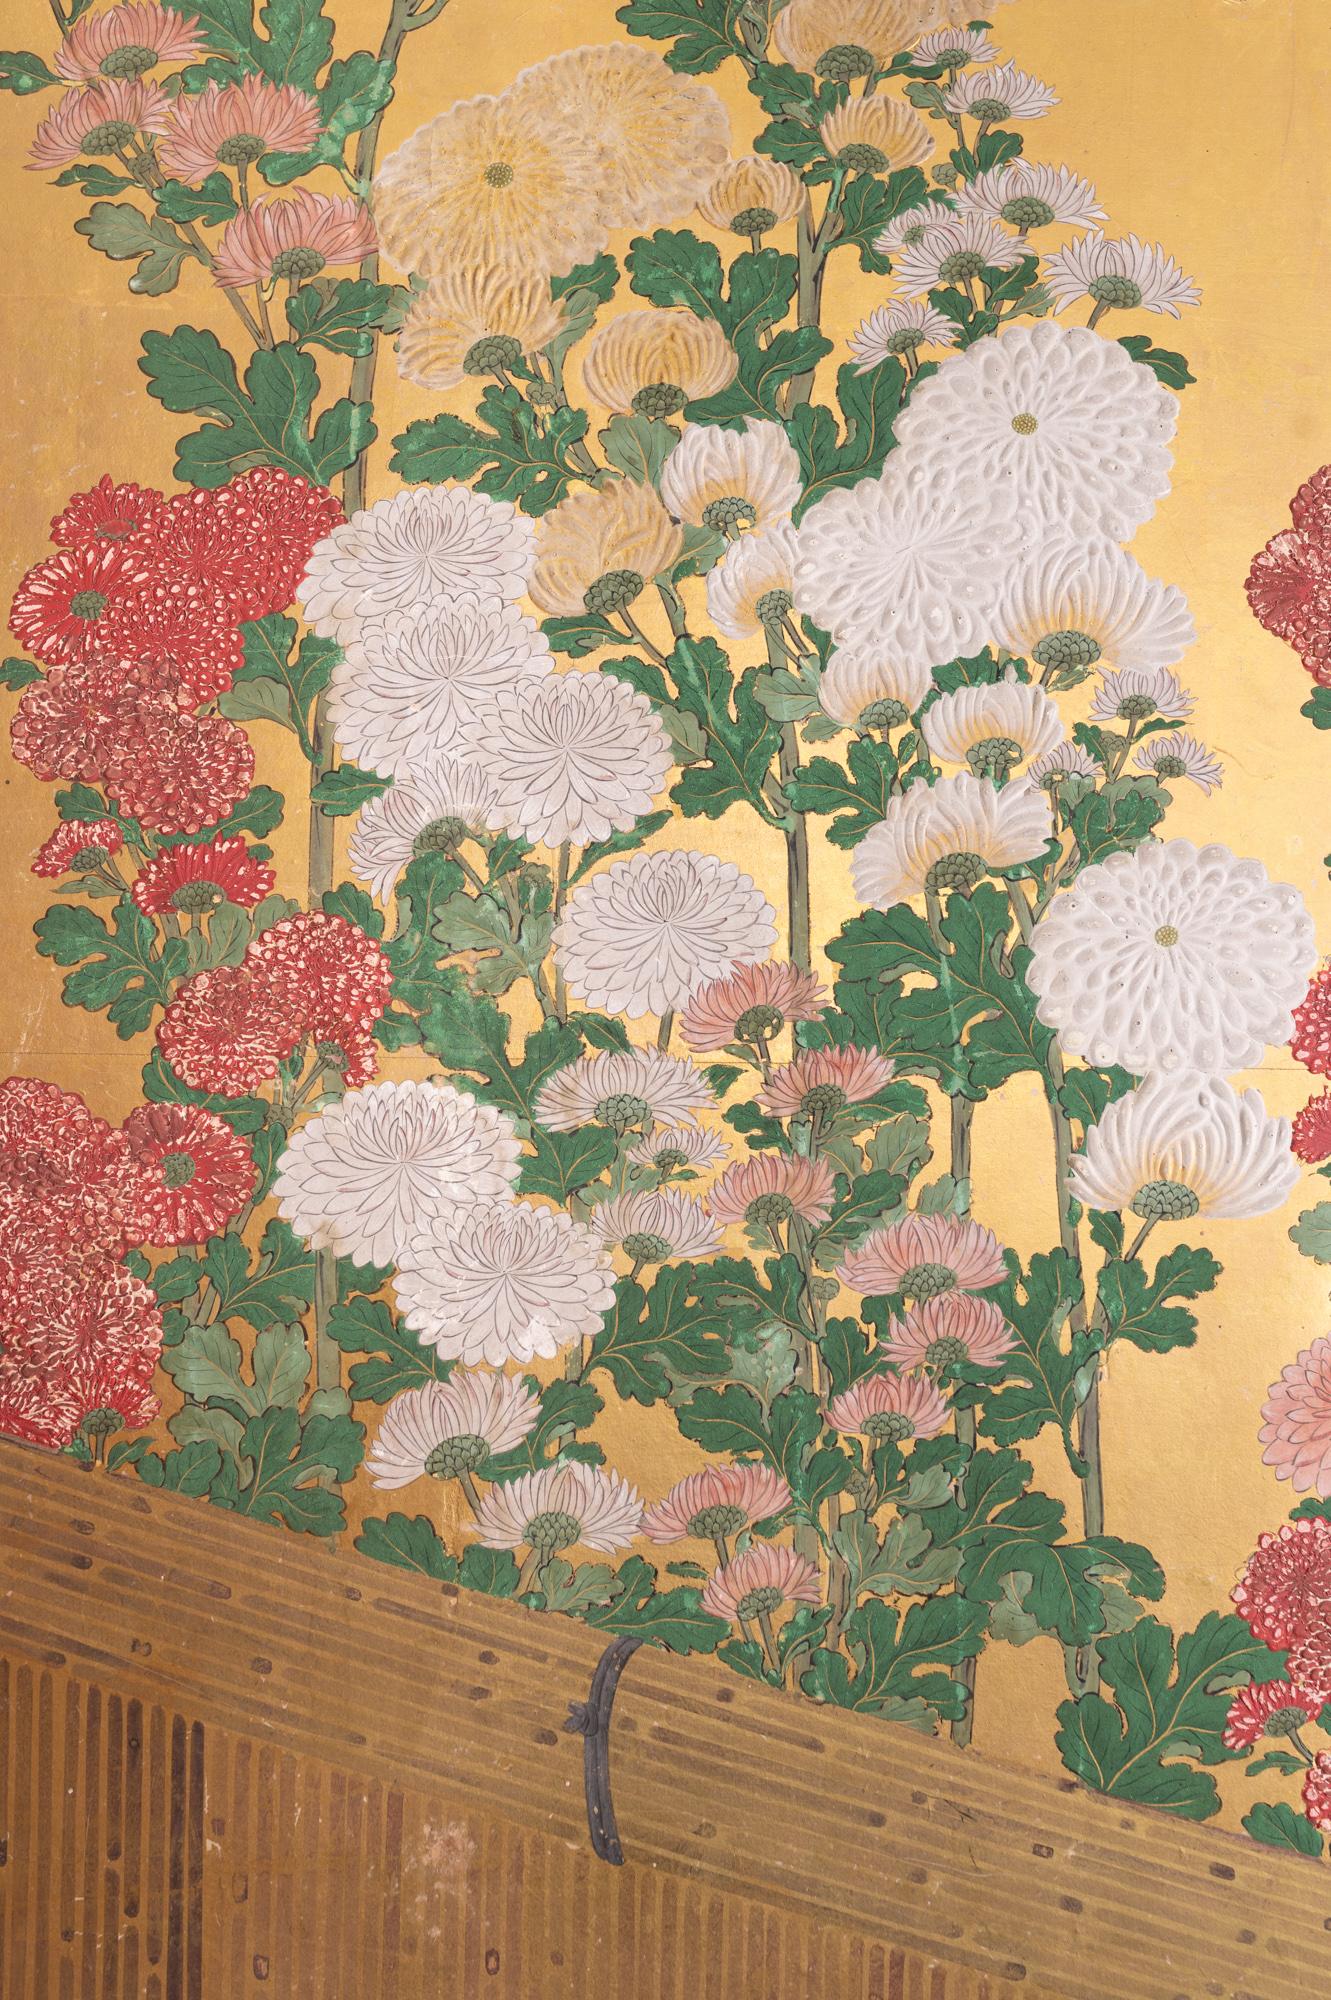 Edo period (18th century) painting of a flowing array of various types of chrysanthemums painted on beautifully faceted heavy gold leaf and behind afinely painted fence. Petals of the chrysanthemums are rendered in raised gofun. This screen has the